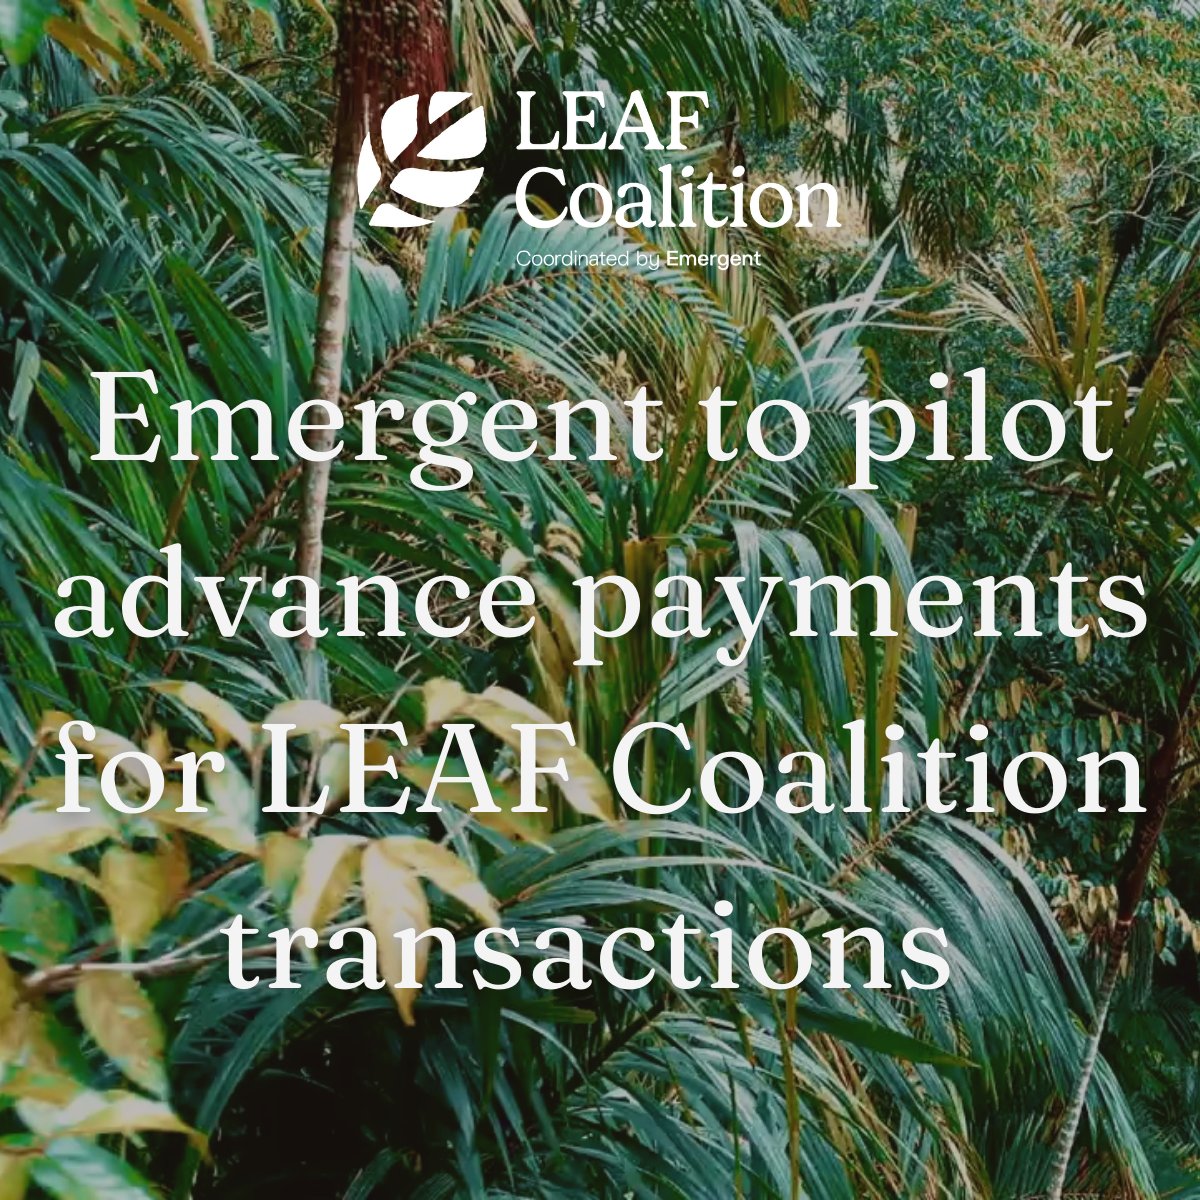 Emergent to pilot advance payments for LEAF Coalition transactions